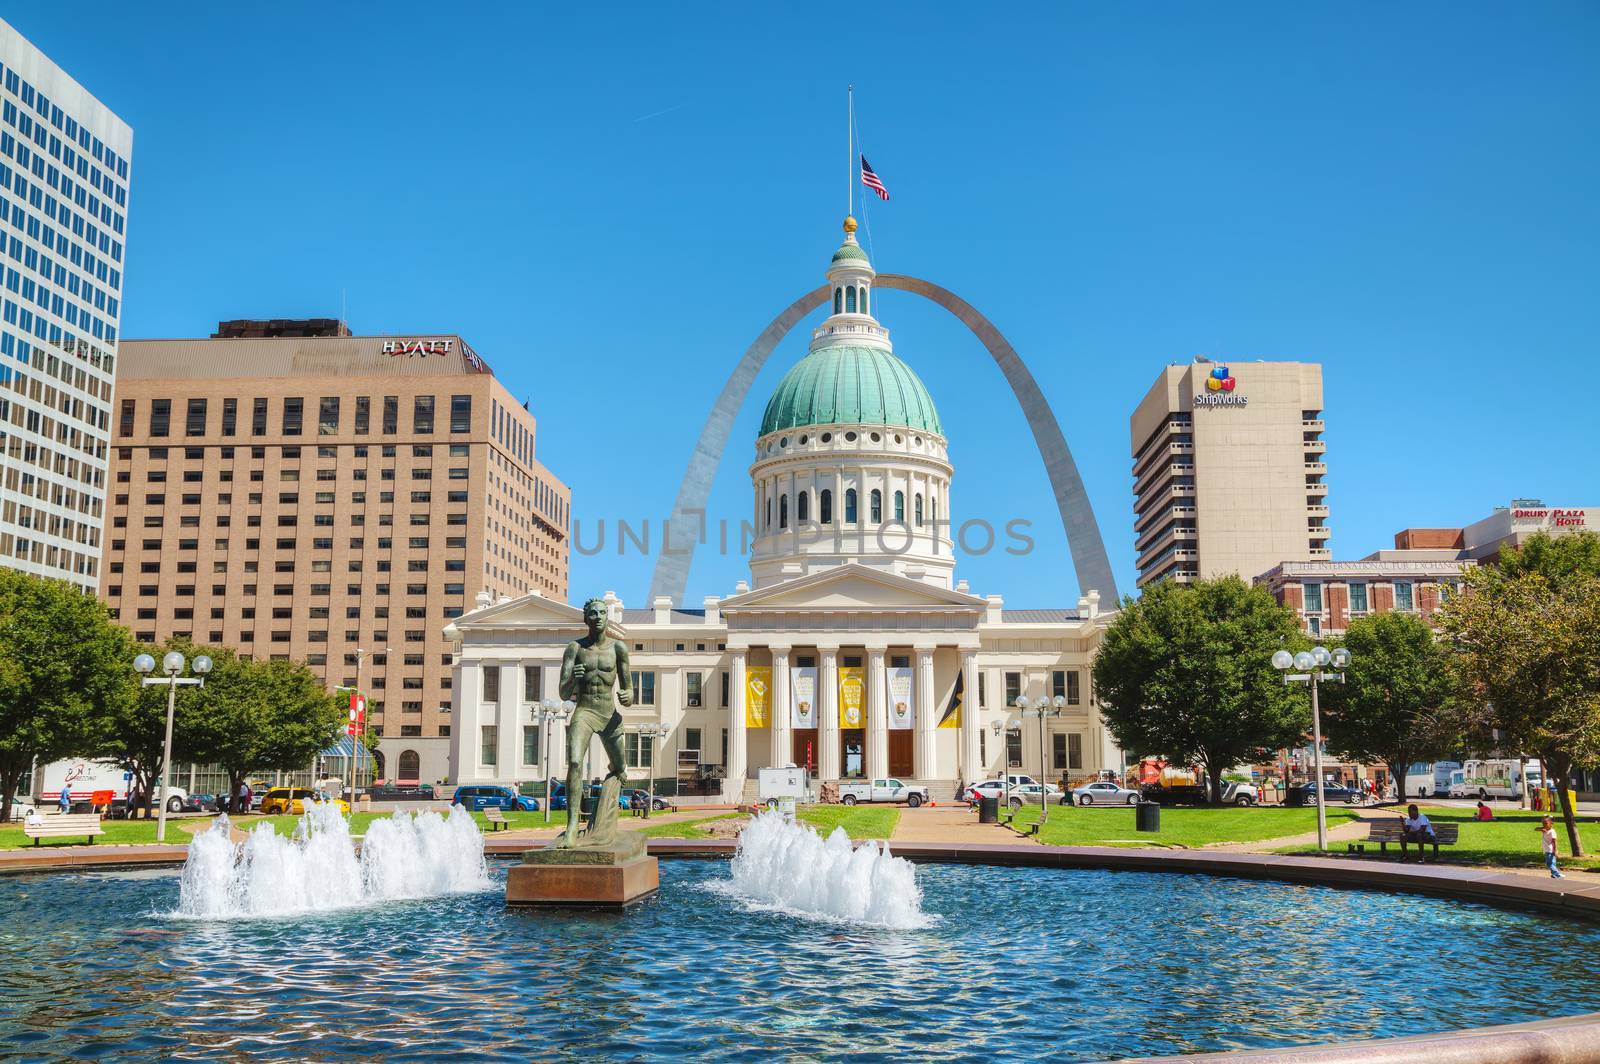 ST LOUIS, MO, USA - AUGUST 25: Downtown St Louis, MO with the Old Courthouse on August 25, 2015 in St Louis, MO, USA.